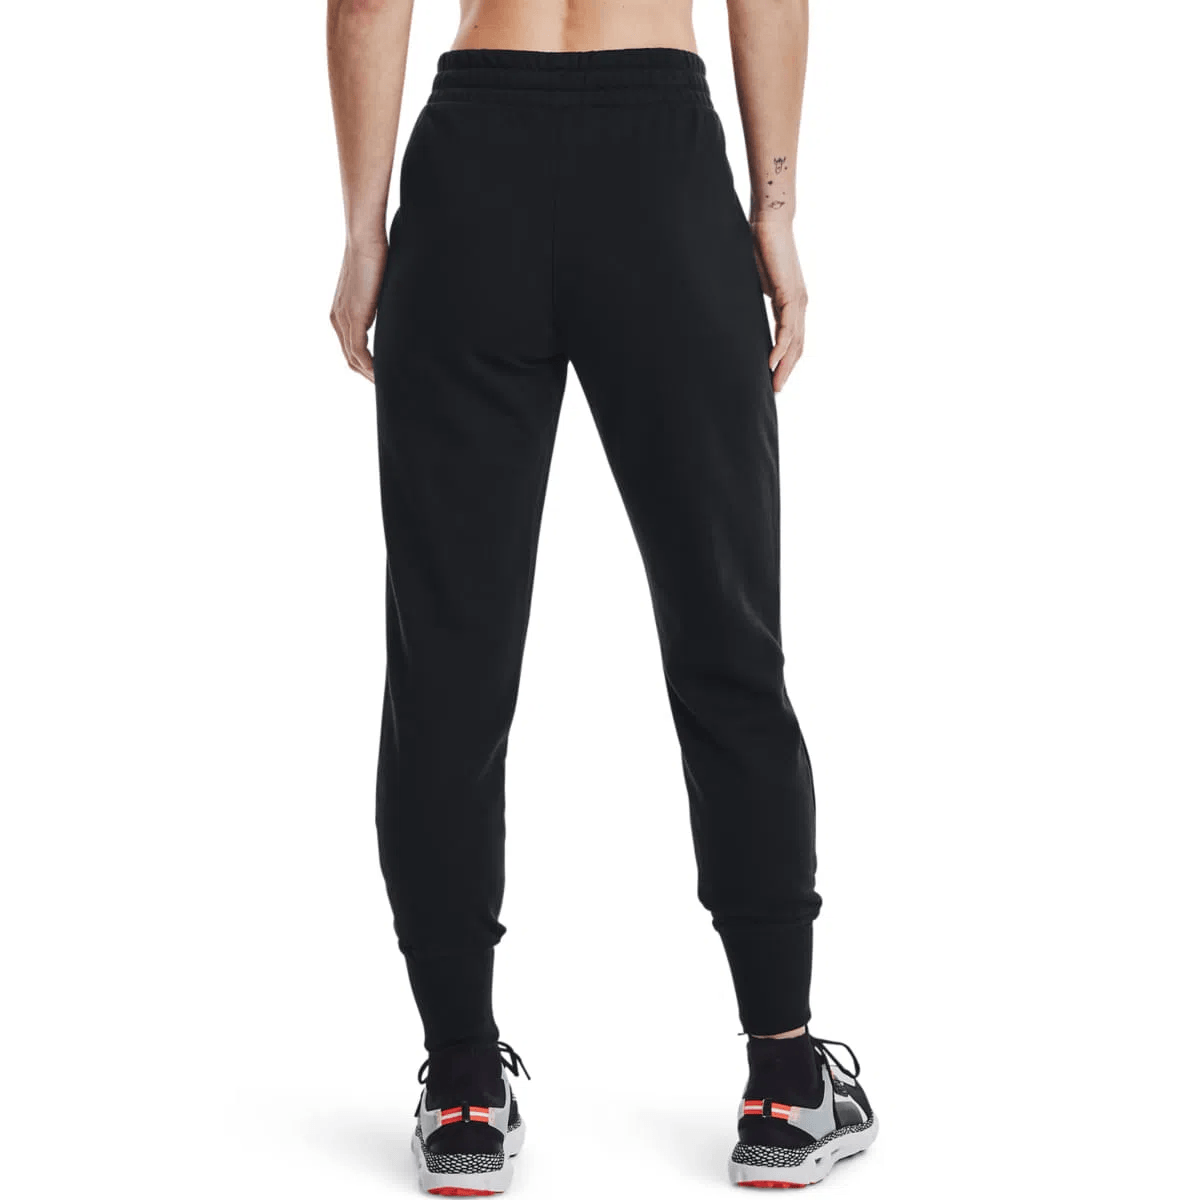 Women's Rival Fleece Jogger Pant from Under Armour